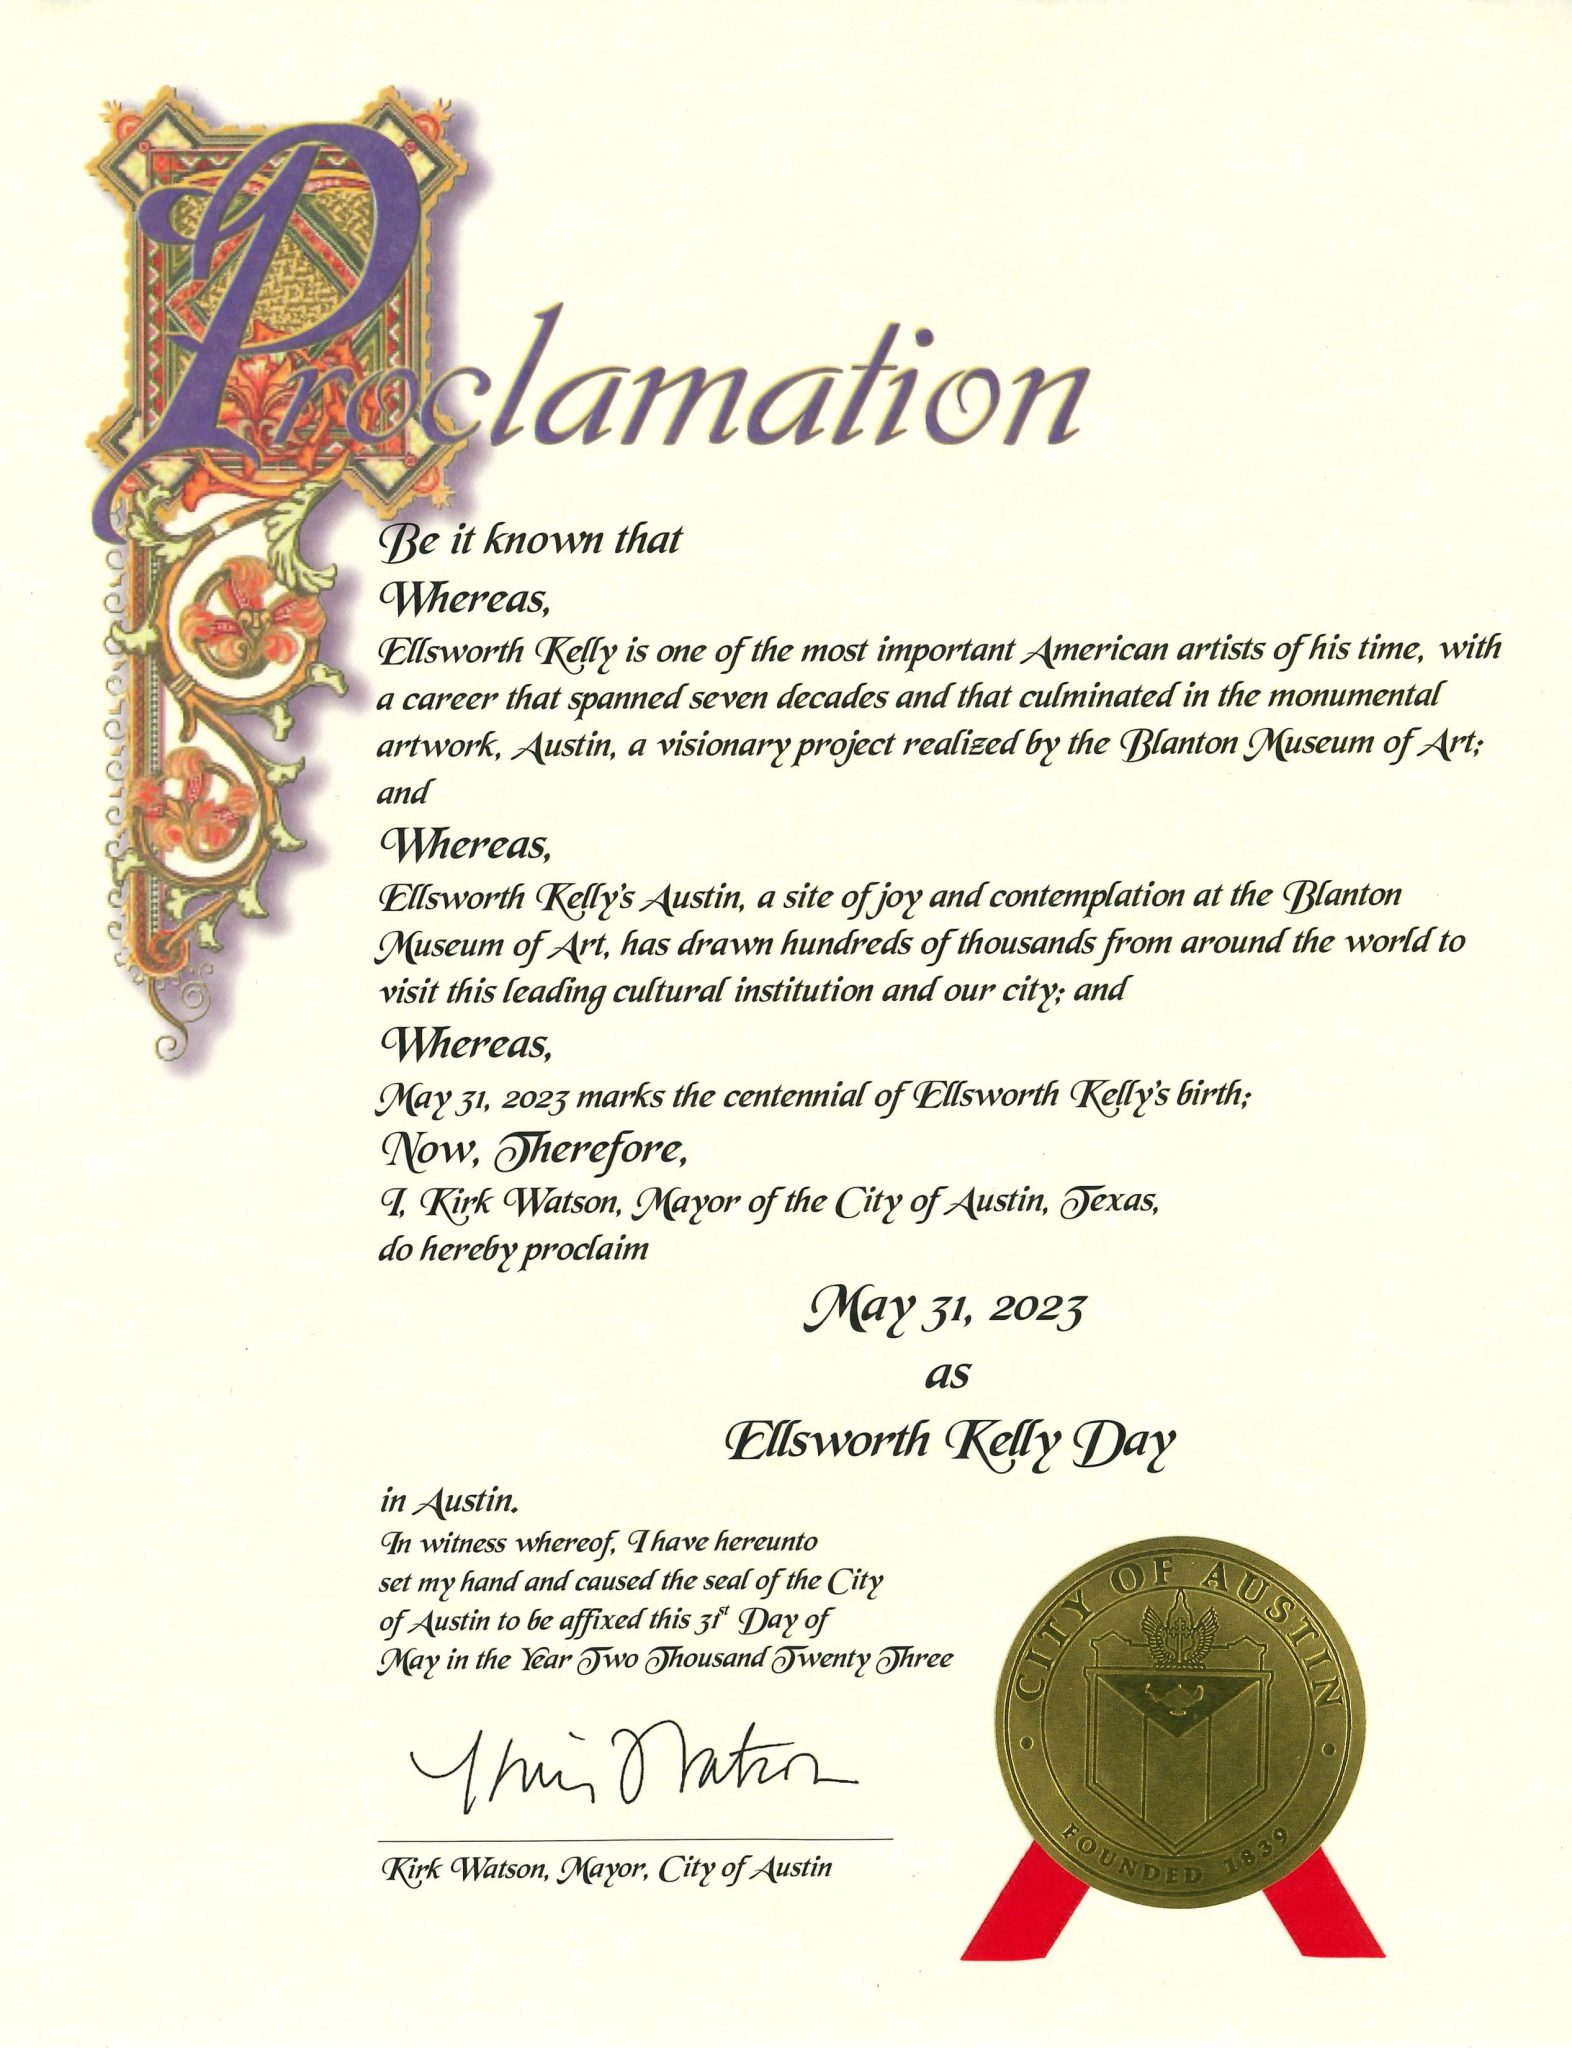 A proclamation by the City of Austin declaring May 31, 2023 as Ellsworth Kelly Day, to mark the centennial of the artist's birthday